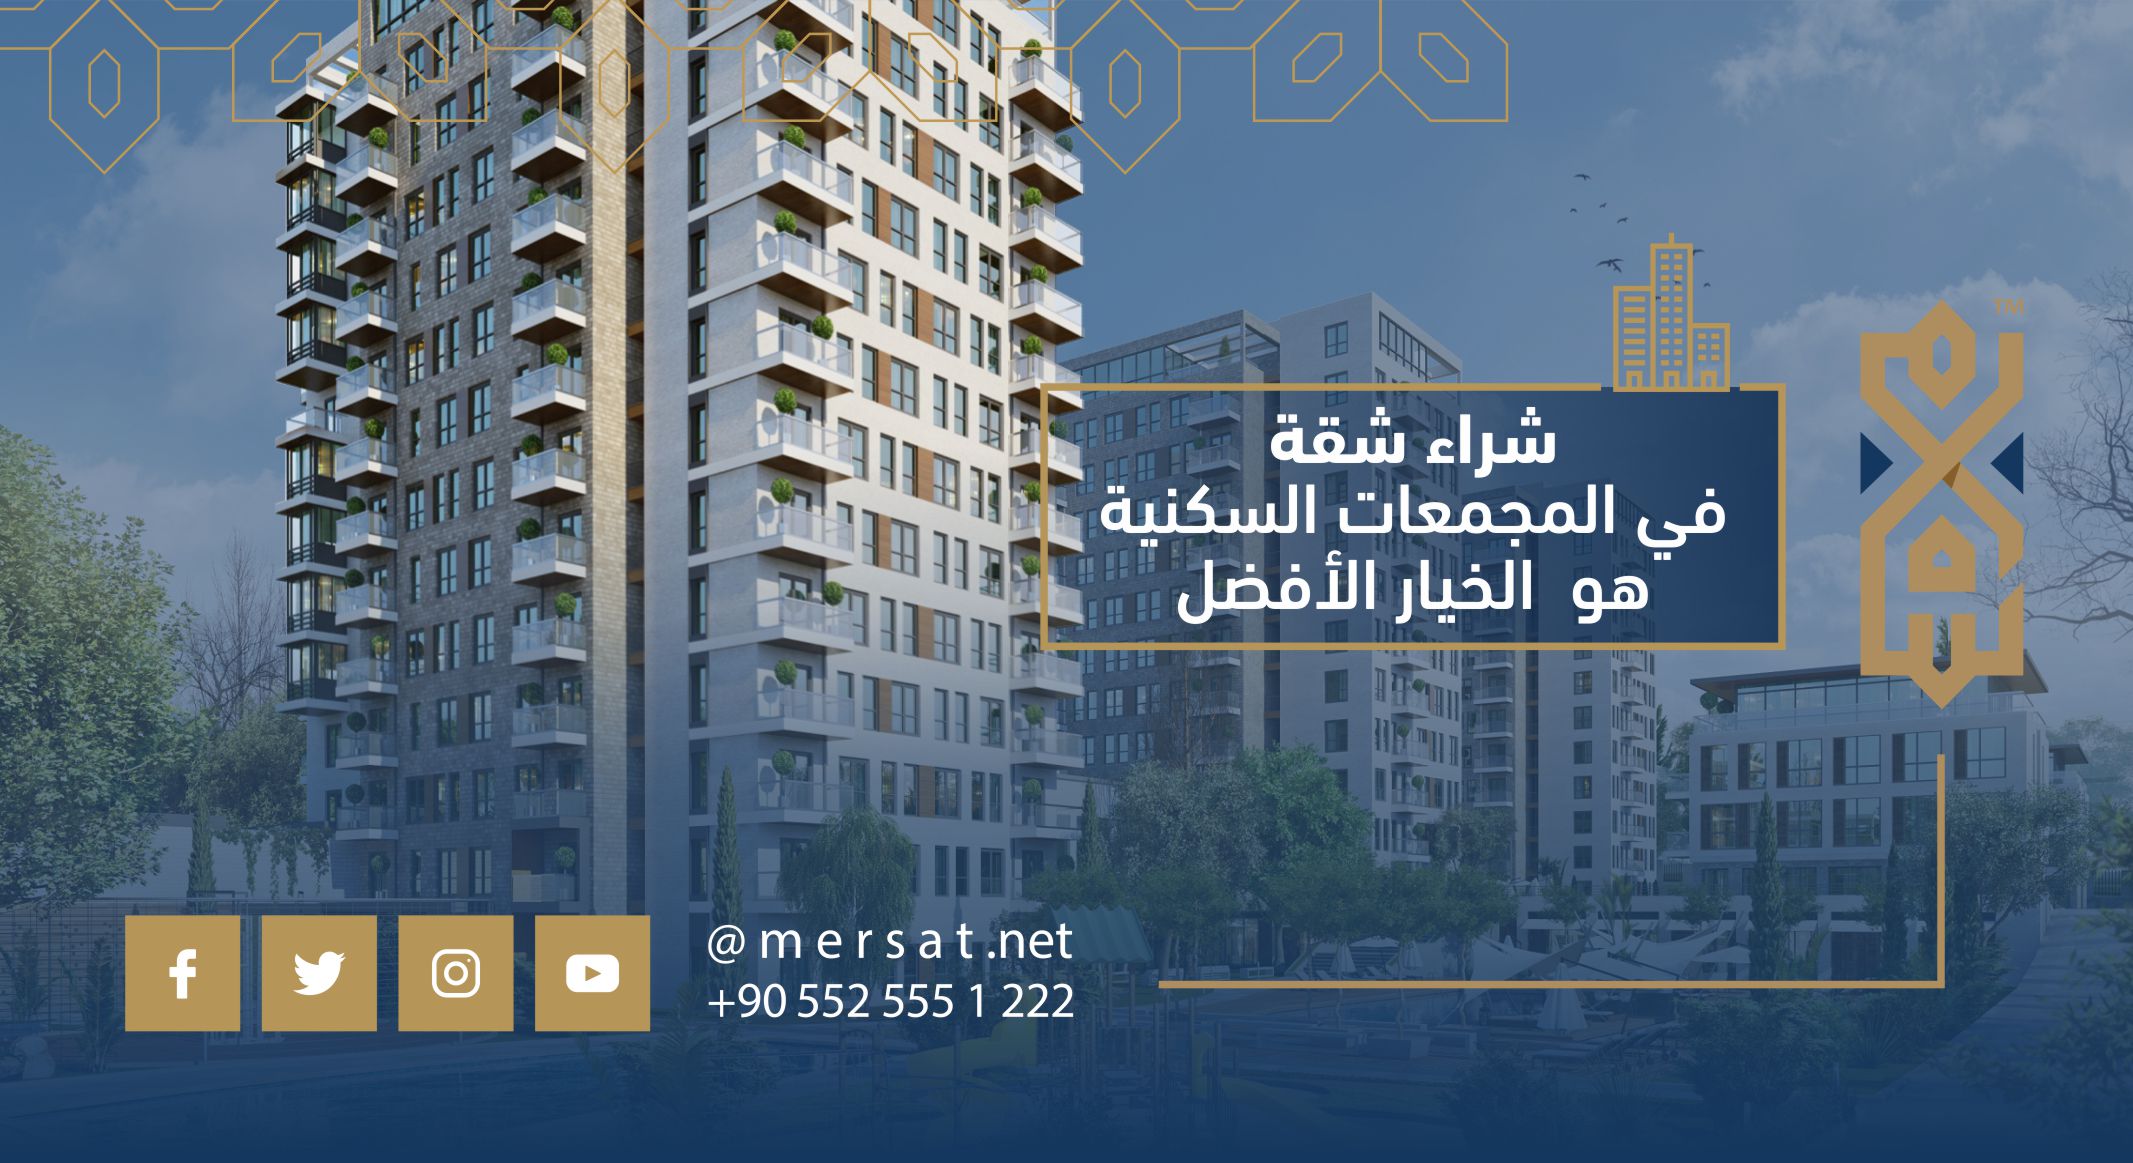 Buying an apartment in residential complexes is the best option